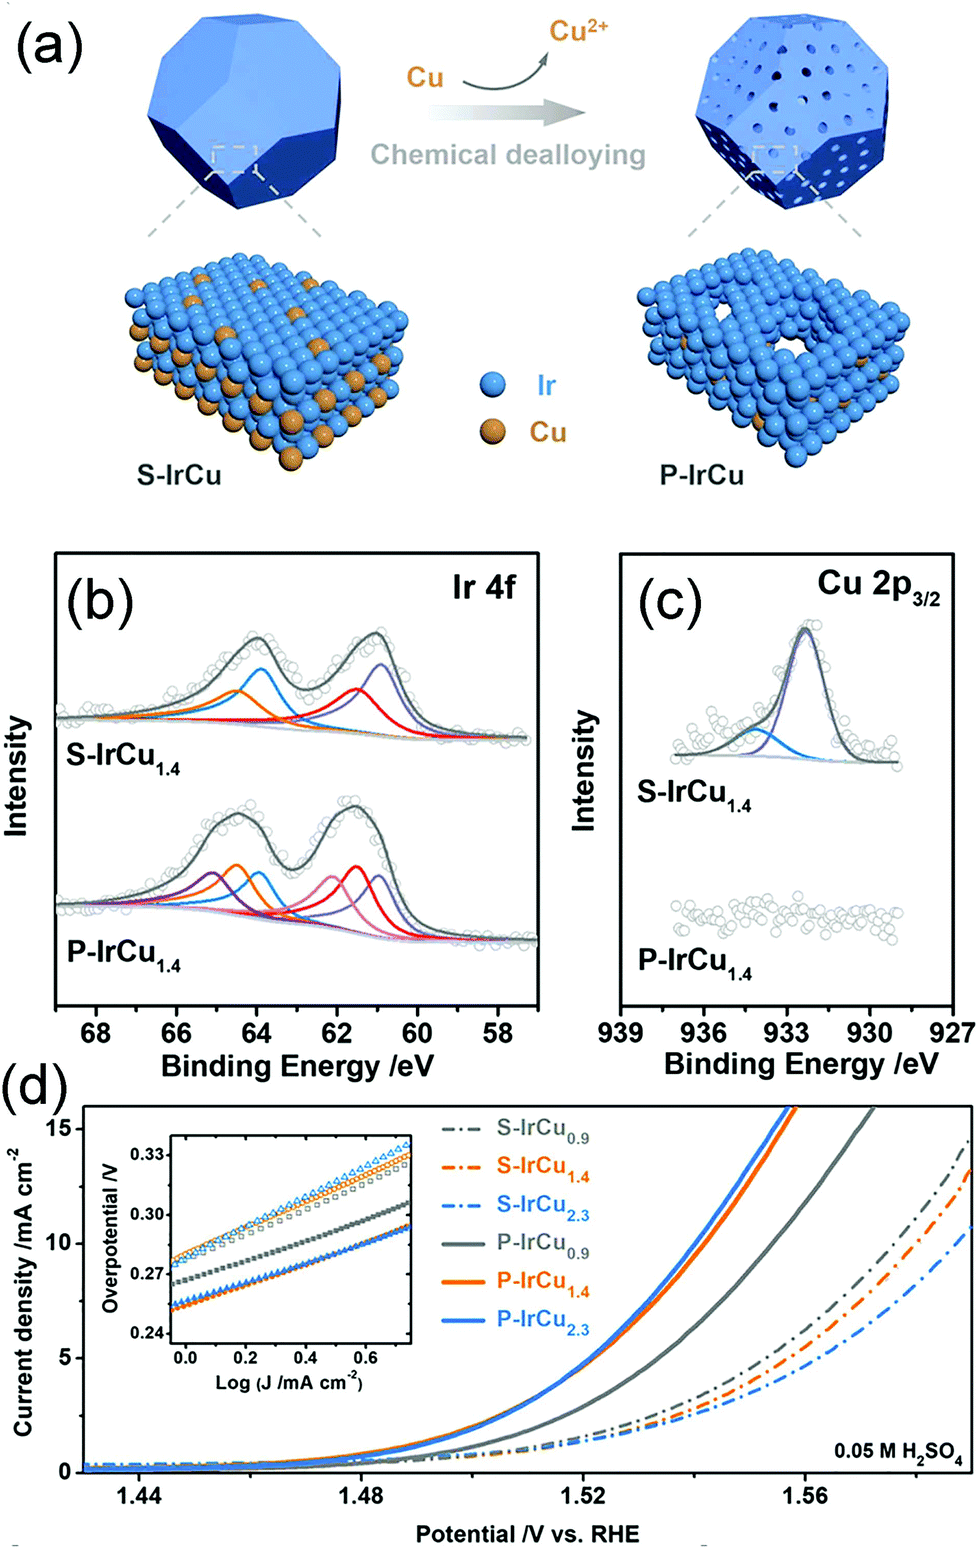 Shaping Well Defined Noble Metal Based Nanostructures For Fabricating High Performance Electrocatalysts Advances And Perspectives Inorganic Chemistry Frontiers Rsc Publishing